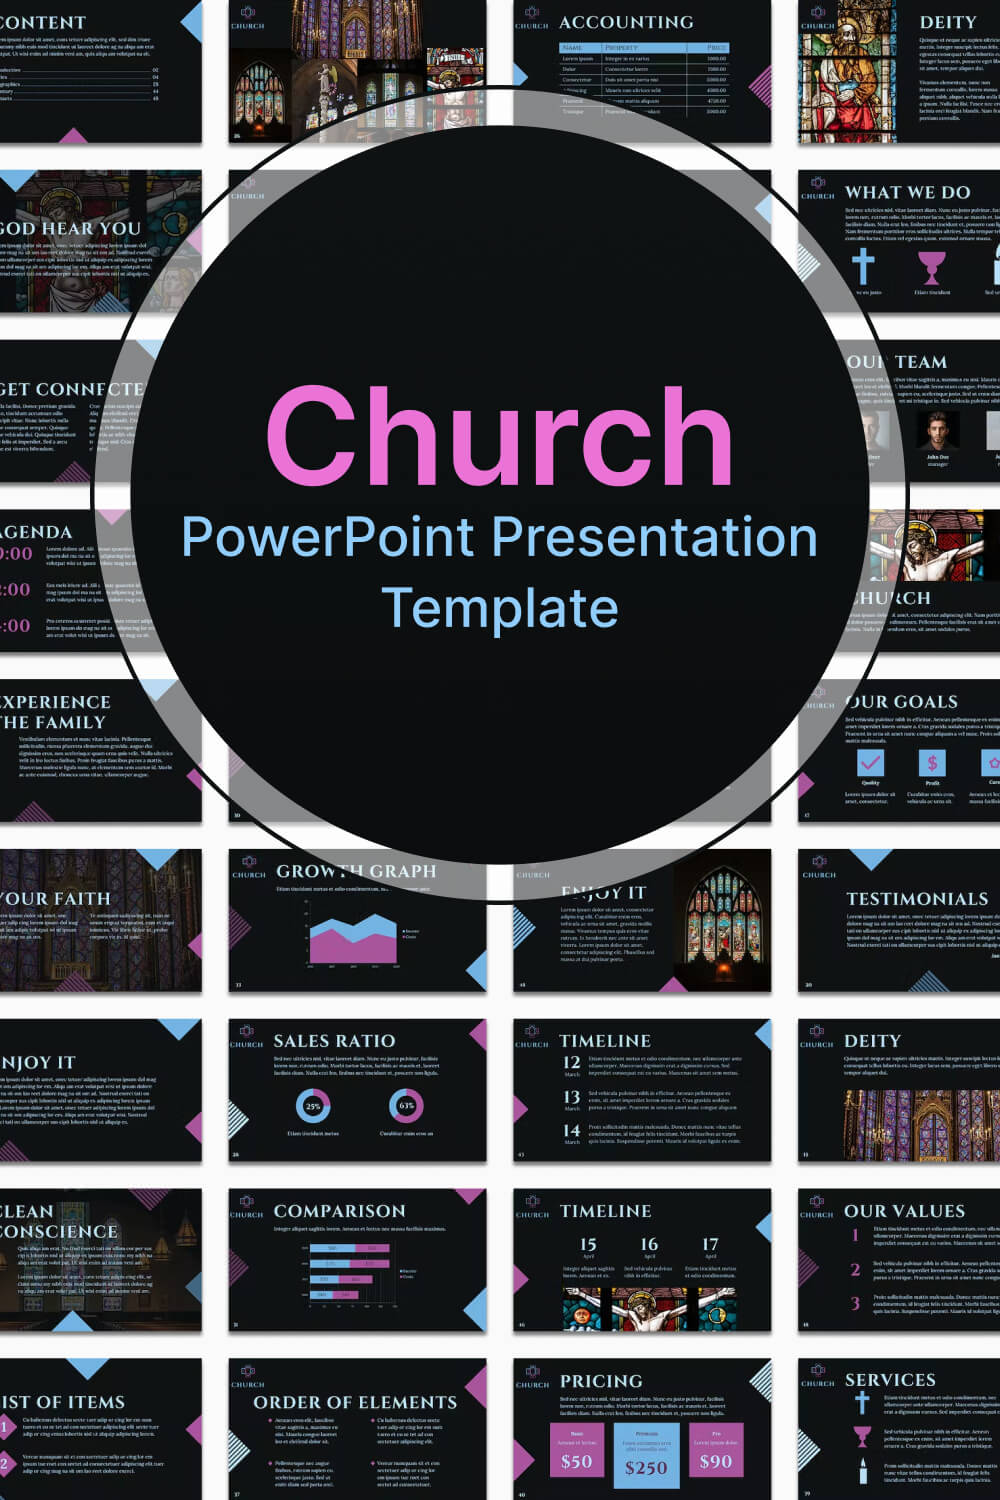 Content of Church PowerPoint Presentation Template.